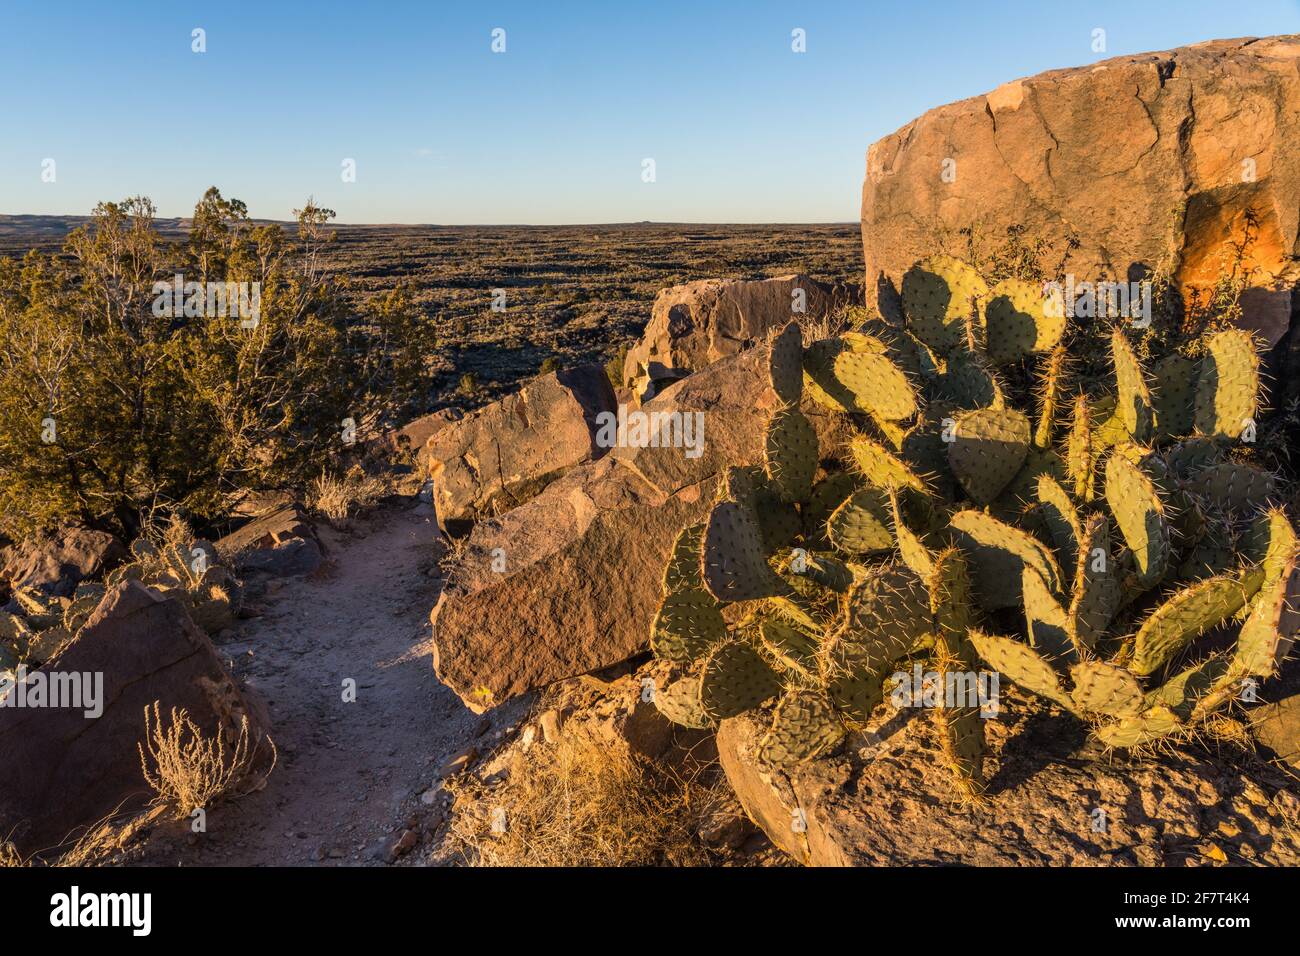 Prickley Pear Cactus among sandstone boulders in the Valley of FIres Recreation Area, New Mexico. Stock Photo